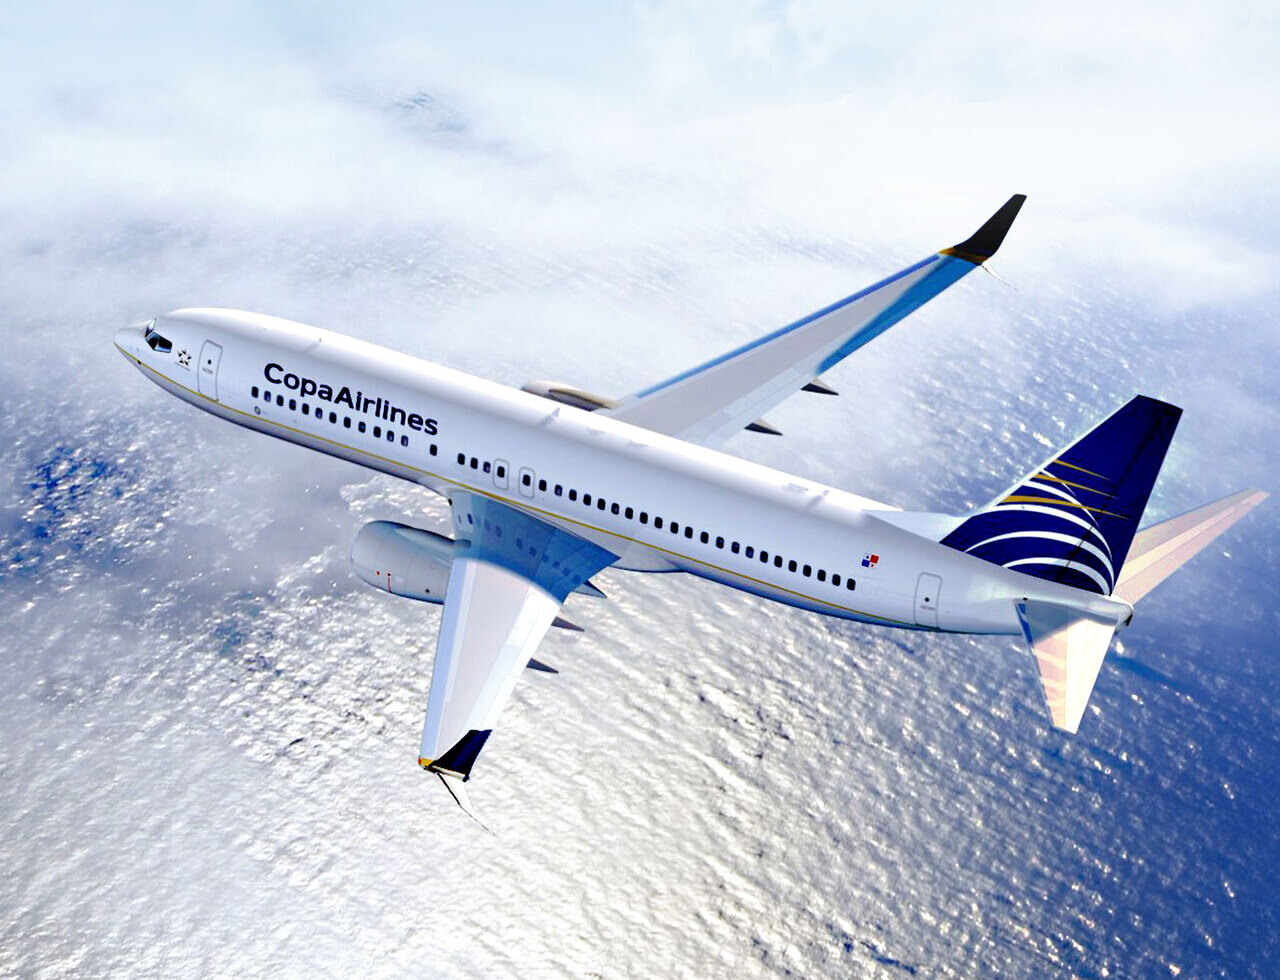 A Copa Airlines Boeing 737 in flight over water.